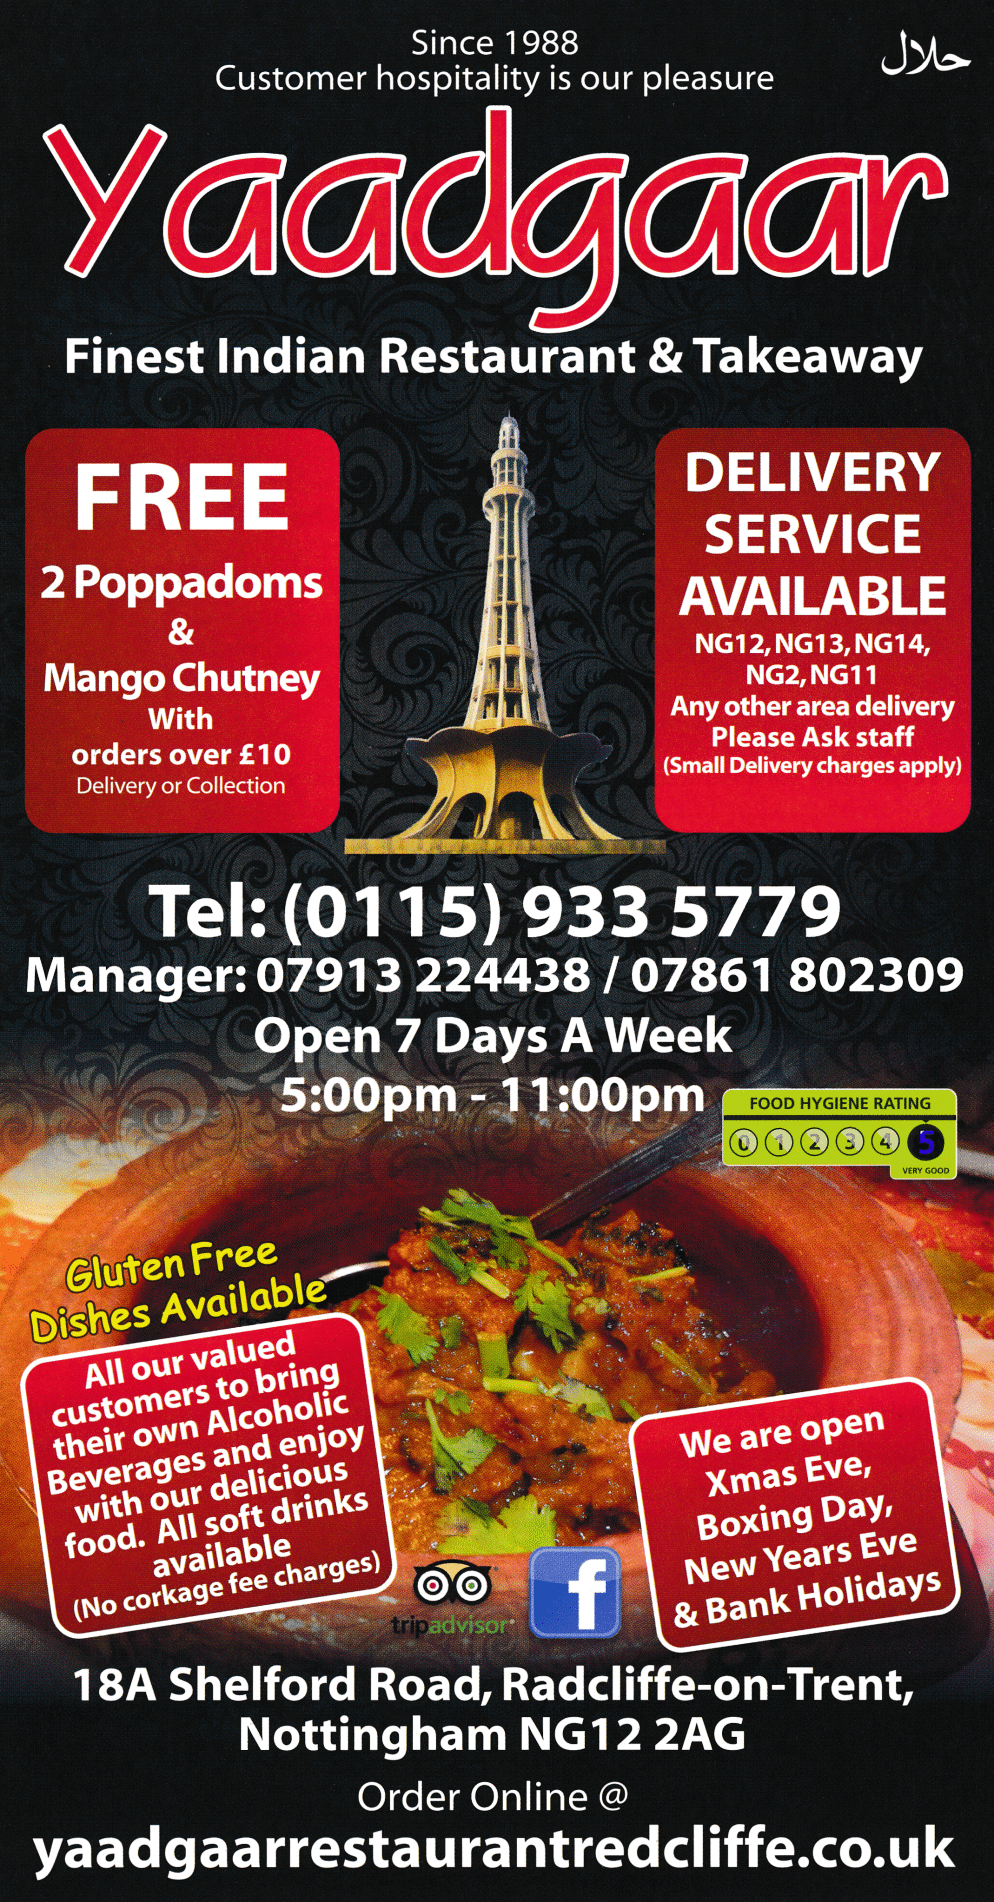 Takeaway and delivery menu for Yaadgaar Indian restaurant in Radcliffe-On-Trent near Nottingham